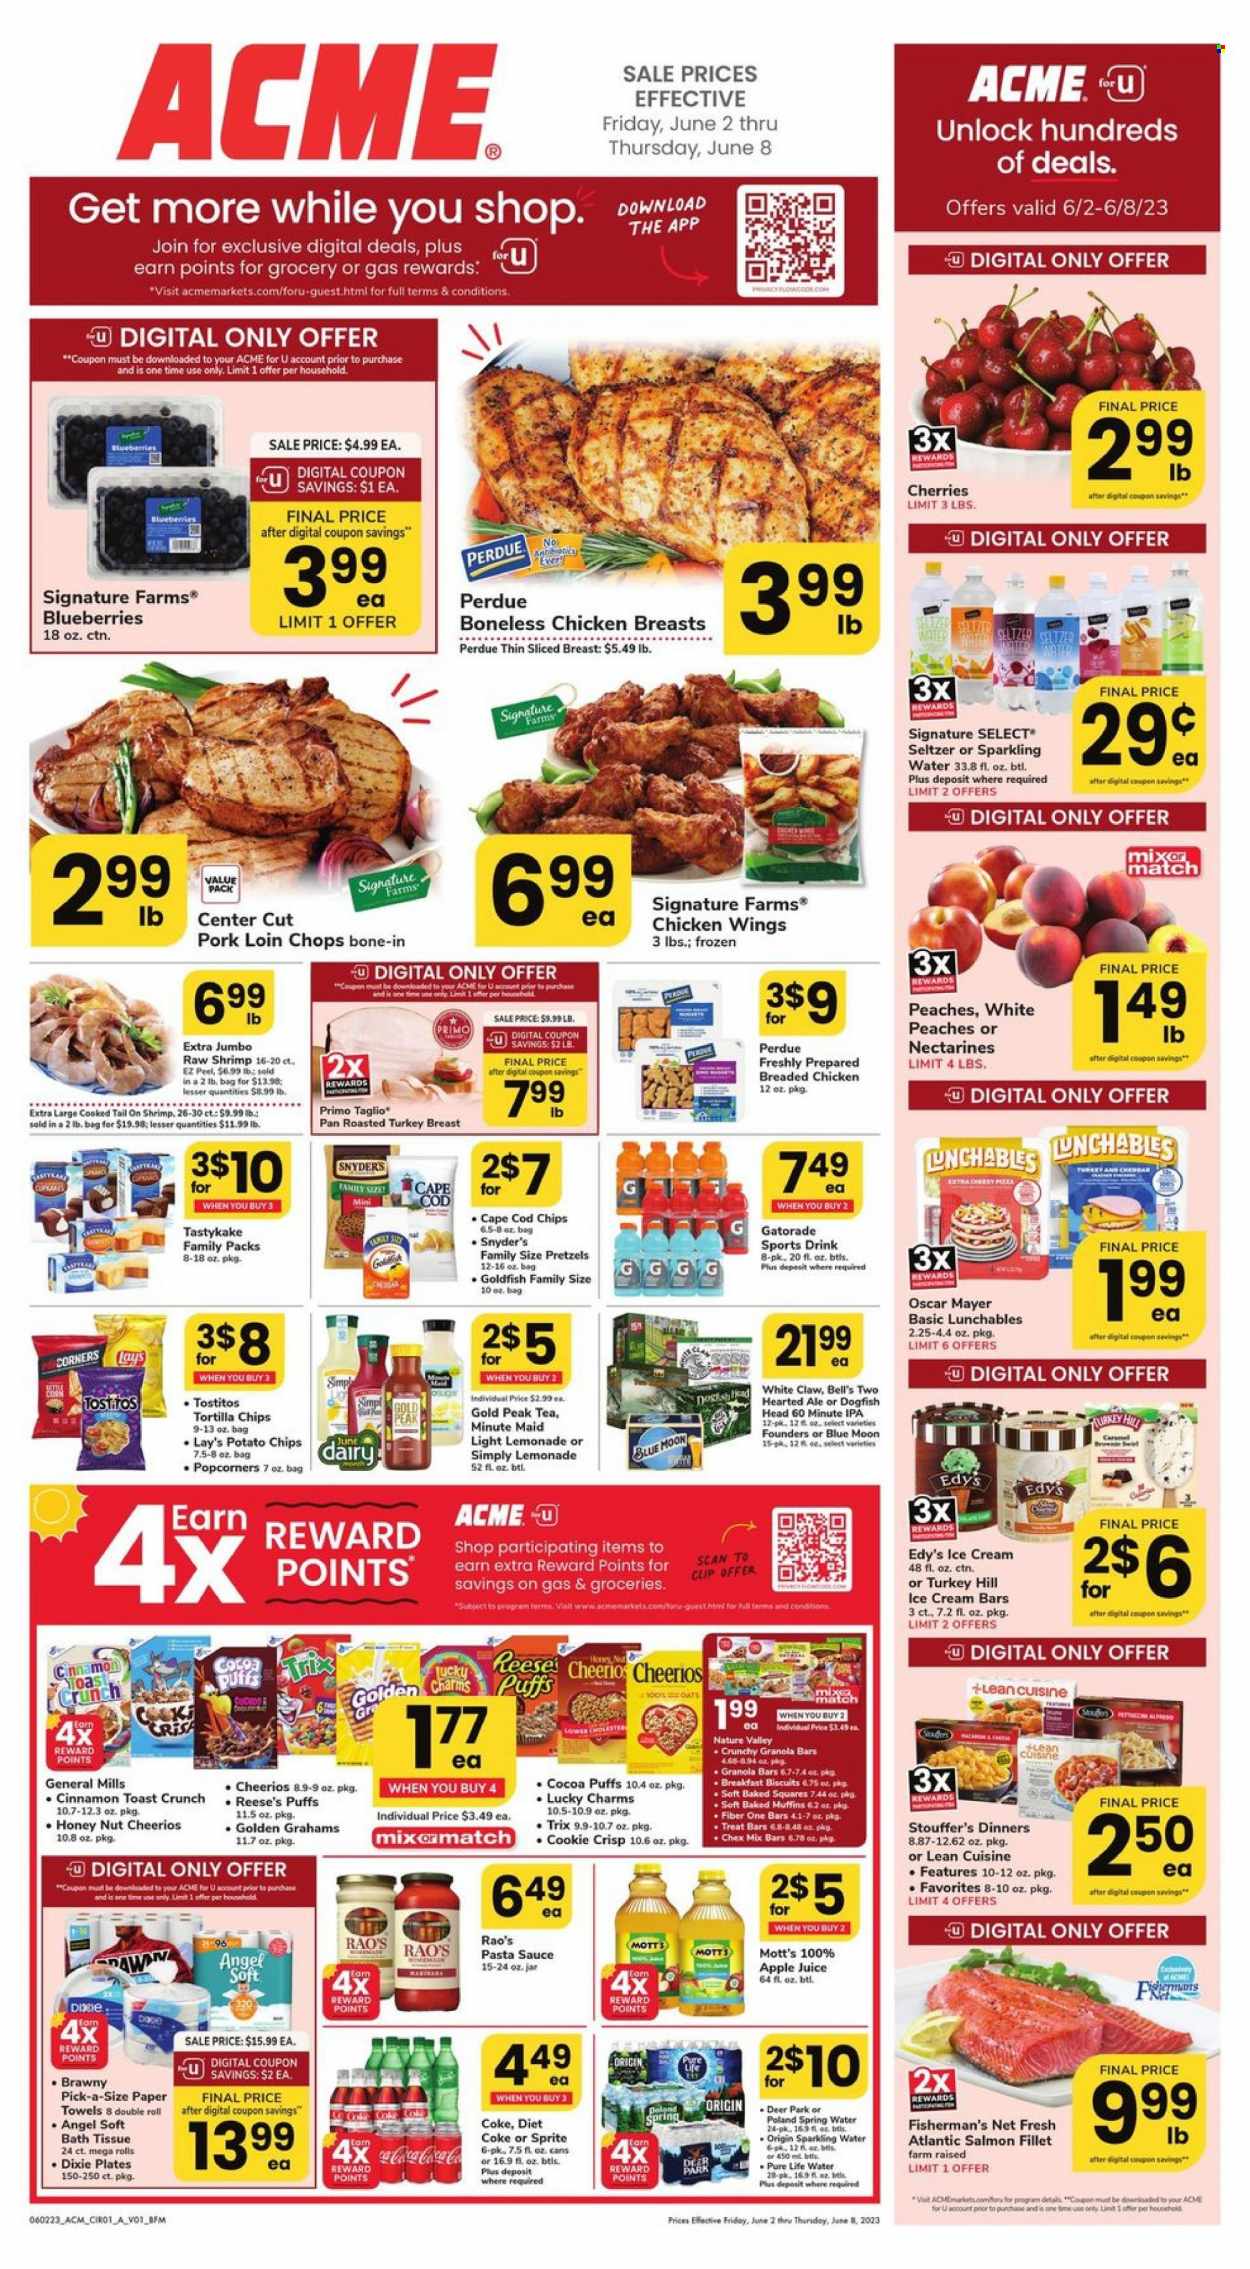 thumbnail - ACME Flyer - 06/02/2023 - 06/08/2023 - Sales products - pretzels, cupcake, puffs, brownies, muffin, macaroons, corn, blueberries, peaches, Mott's, salmon, salmon fillet, shrimps, pasta sauce, sauce, fried chicken, Lean Cuisine, Perdue®, Lunchables, Oscar Mayer, ice cream, ice cream bars, Reese's, chicken wings, Stouffer's, biscuit, General Mills, tortilla chips, potato chips, Lay’s, popcorn, Goldfish, Tostitos, Chex Mix, oats, Cheerios, granola bar, Trix, Nature Valley, Fiber One, cinnamon, caramel, apple juice, Coca-Cola, lemonade, Sprite, juice, ice tea, Diet Coke, soft drink, Gold Peak Tea, Gatorade, fruit punch, Coke, seltzer water, spring water, sparkling water, Pure Life Water, water, White Claw, beer, IPA, Bell's, pork chops, pork loin, pork meat, bath tissue, plate, pan, pen, Dixie, towel, mixer, electrolyte drink, nectarines, Blue Moon. Page 1.